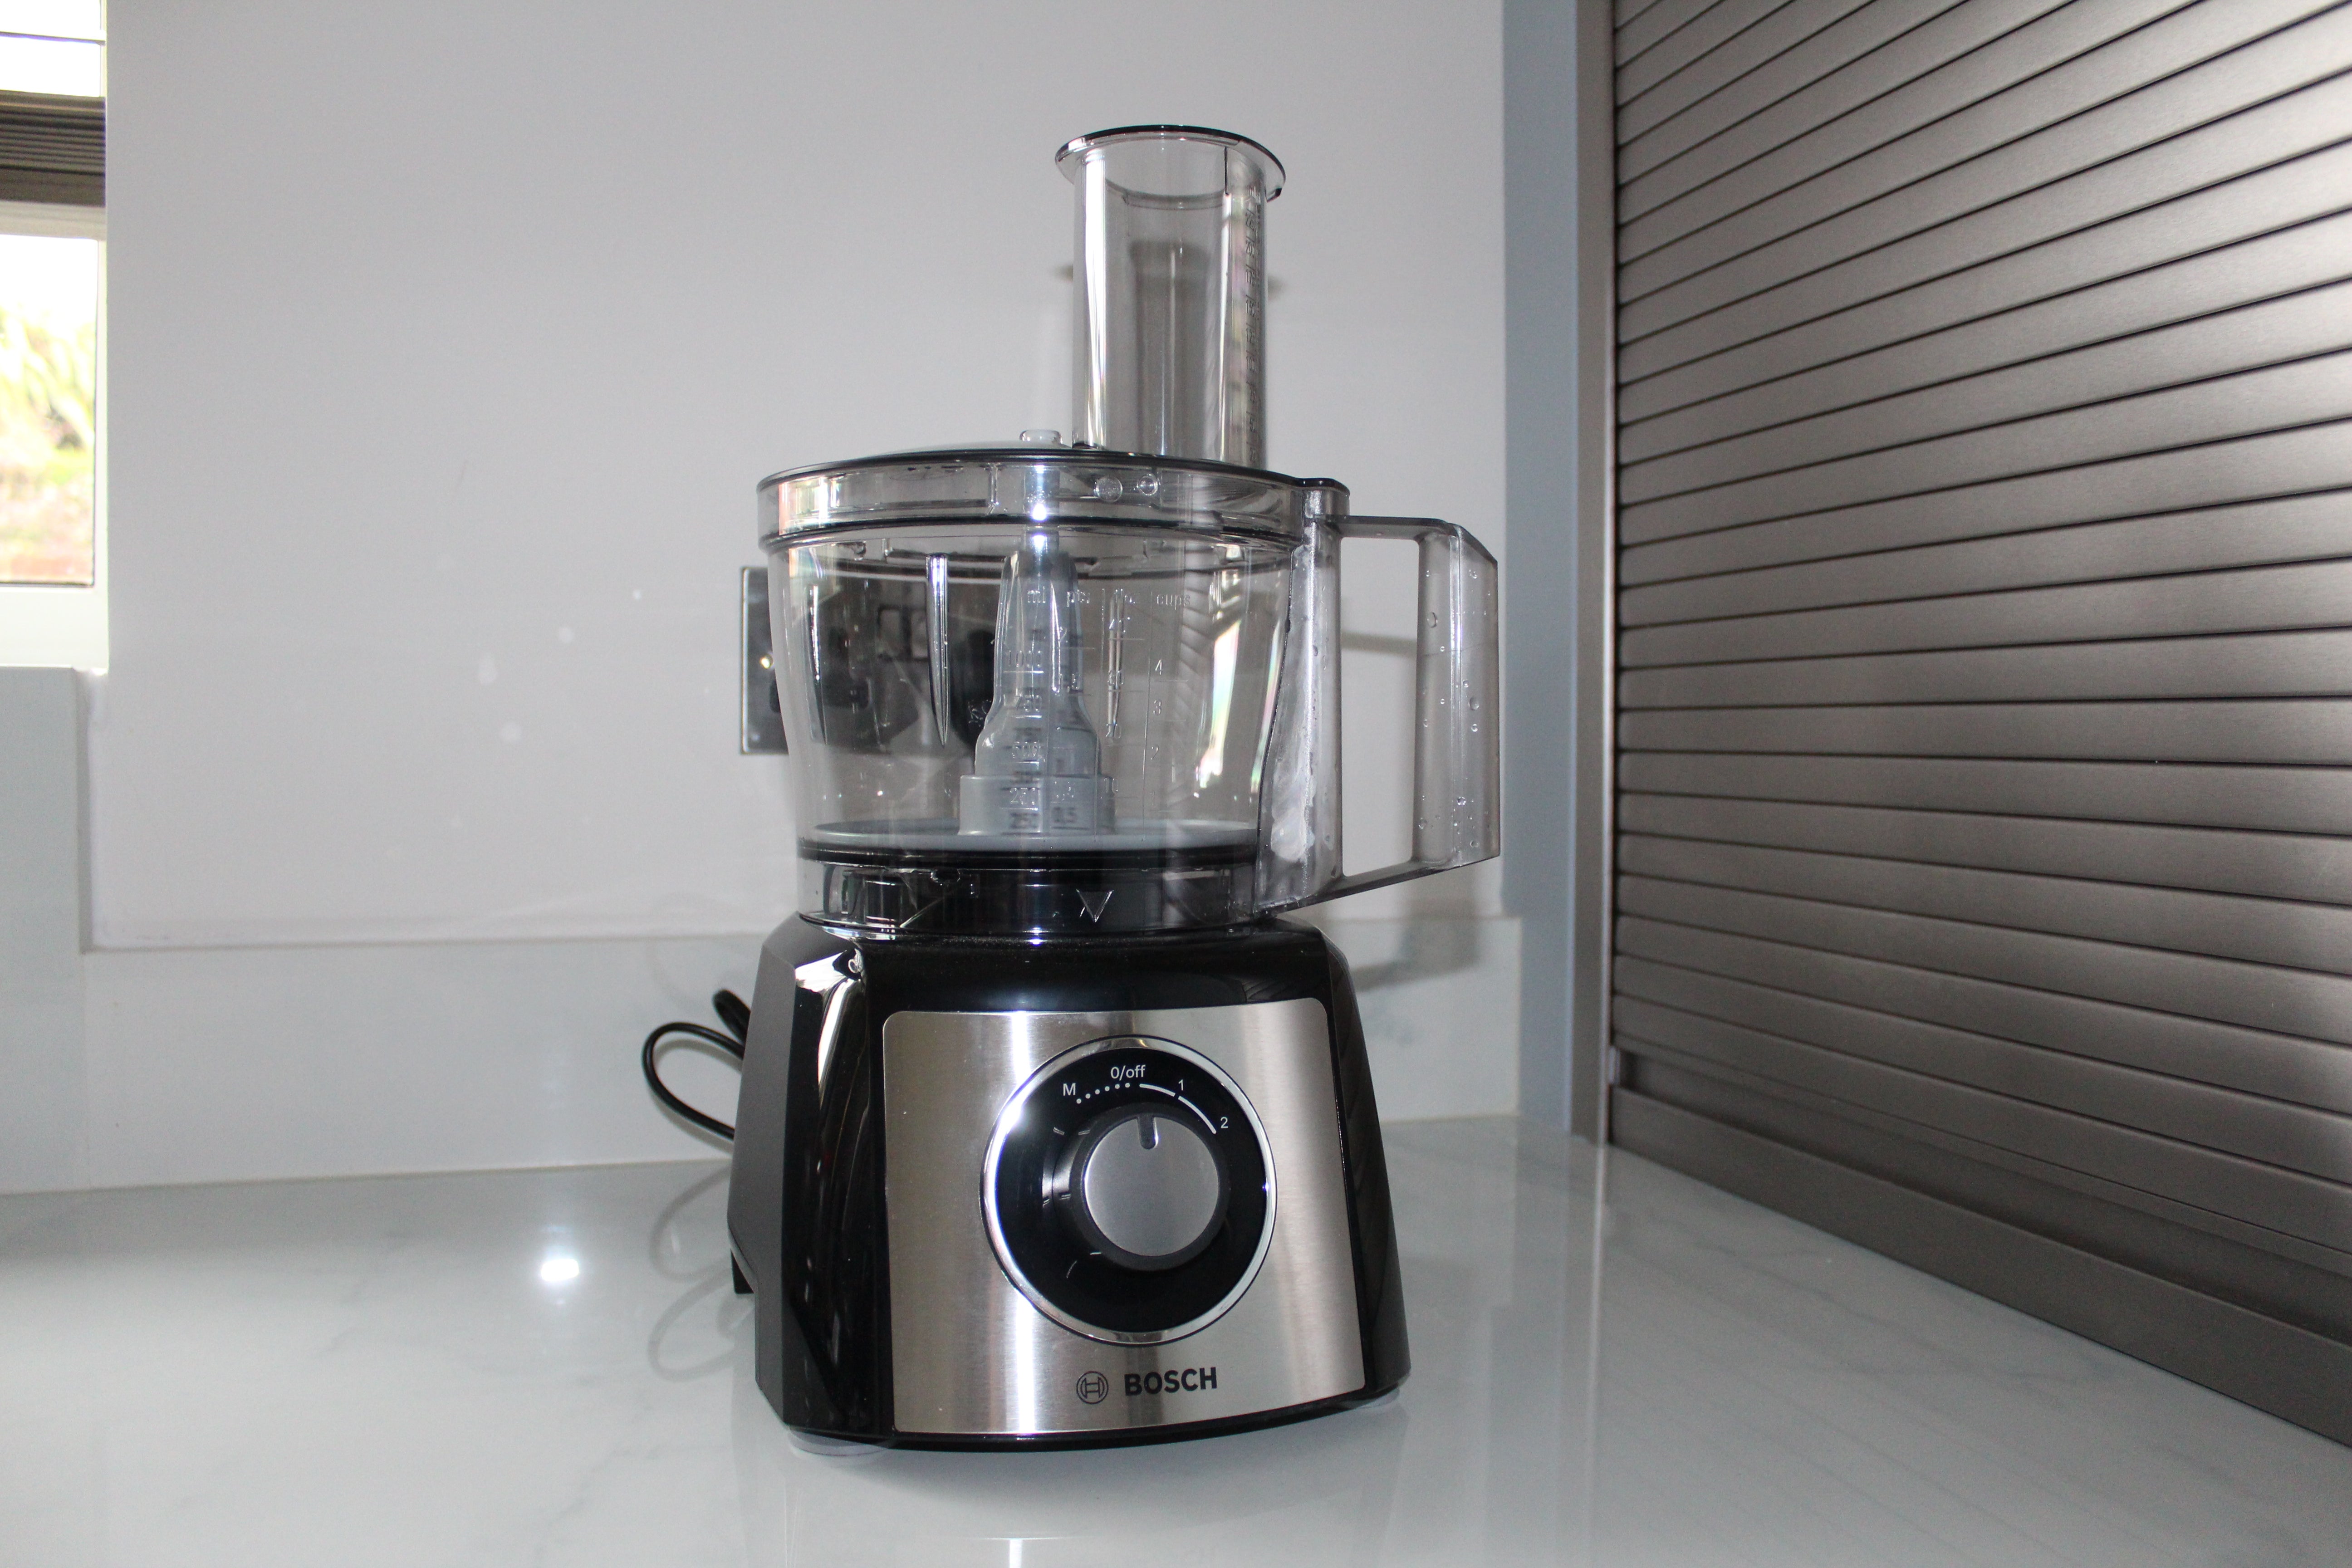 Bosch MultiTalent 3 food processor Review | Trusted